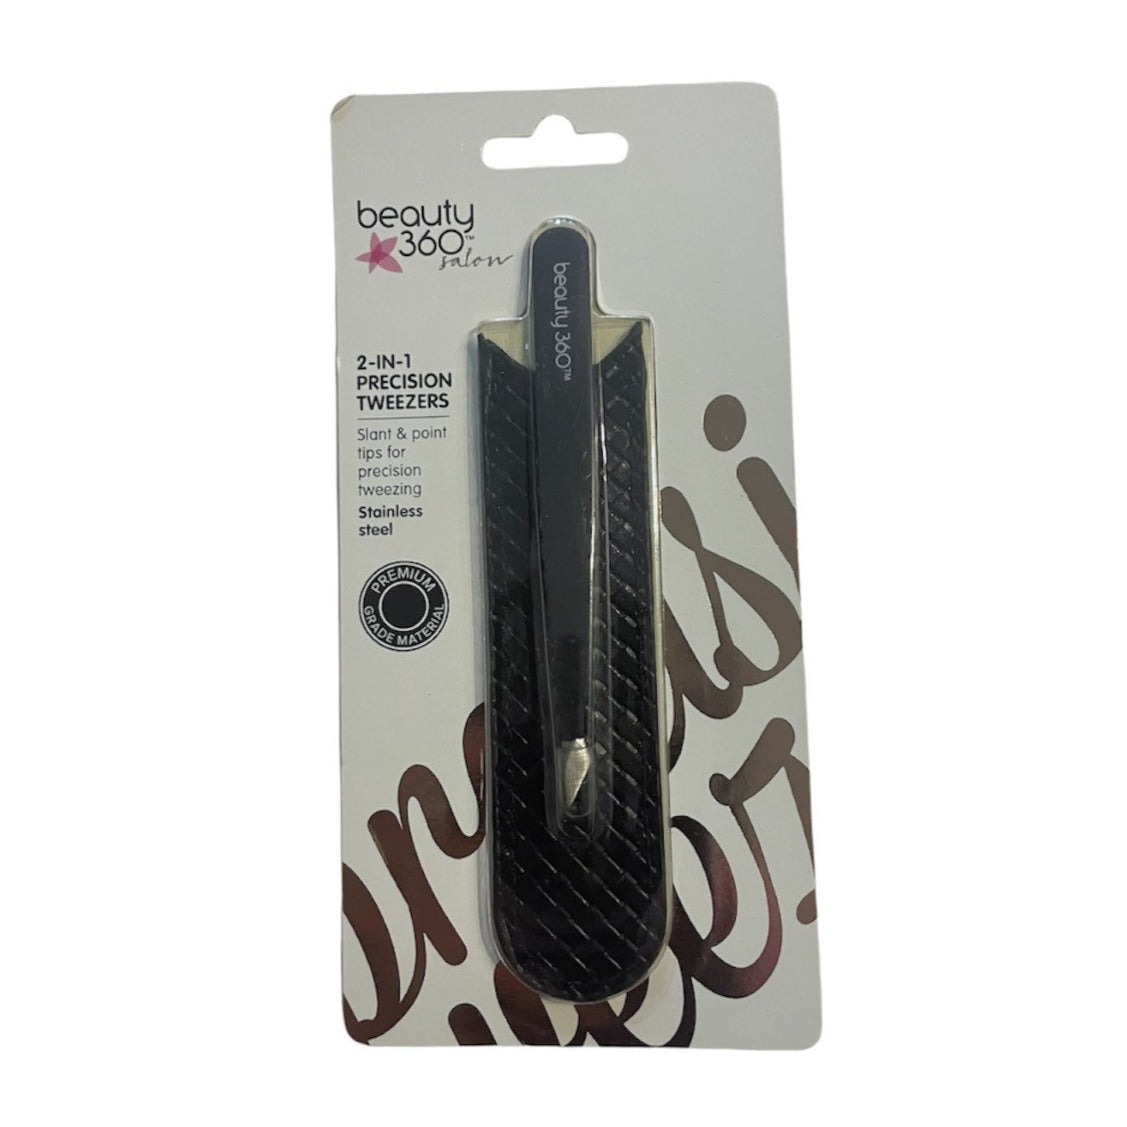 Beauty 360 2-In-1 Precision Stainless Steel Tweezers, Slant & Point Tips Liquidation discount store deal of the day black friday stocking filler